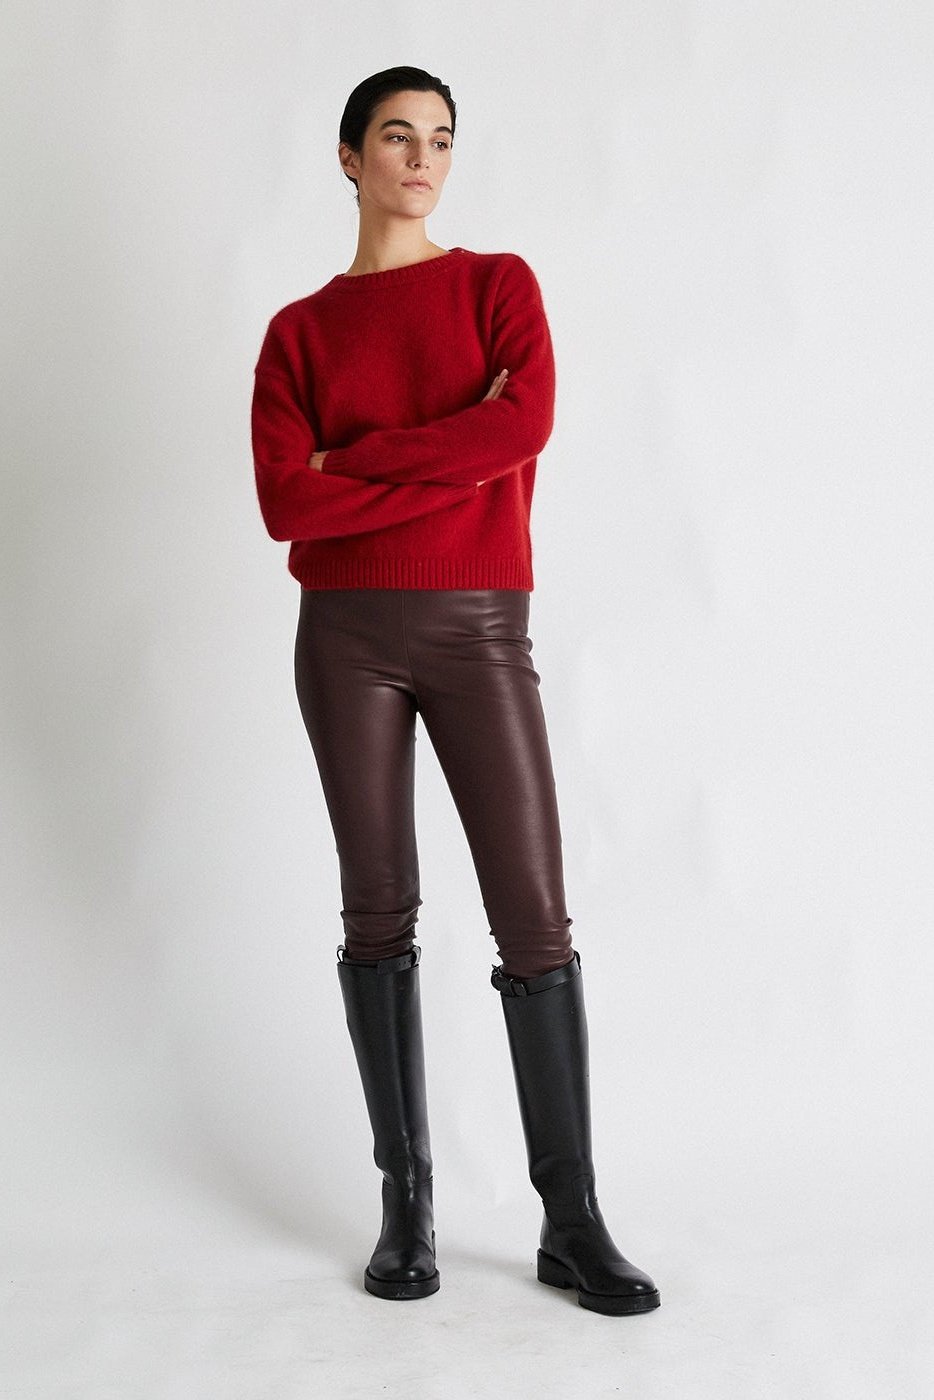 + Beryll Holly Cashmere Sweater | Cherry Red - +Beryll Holly Cashmere Sweater | Cherry Red - +Beryll Worn By Good People